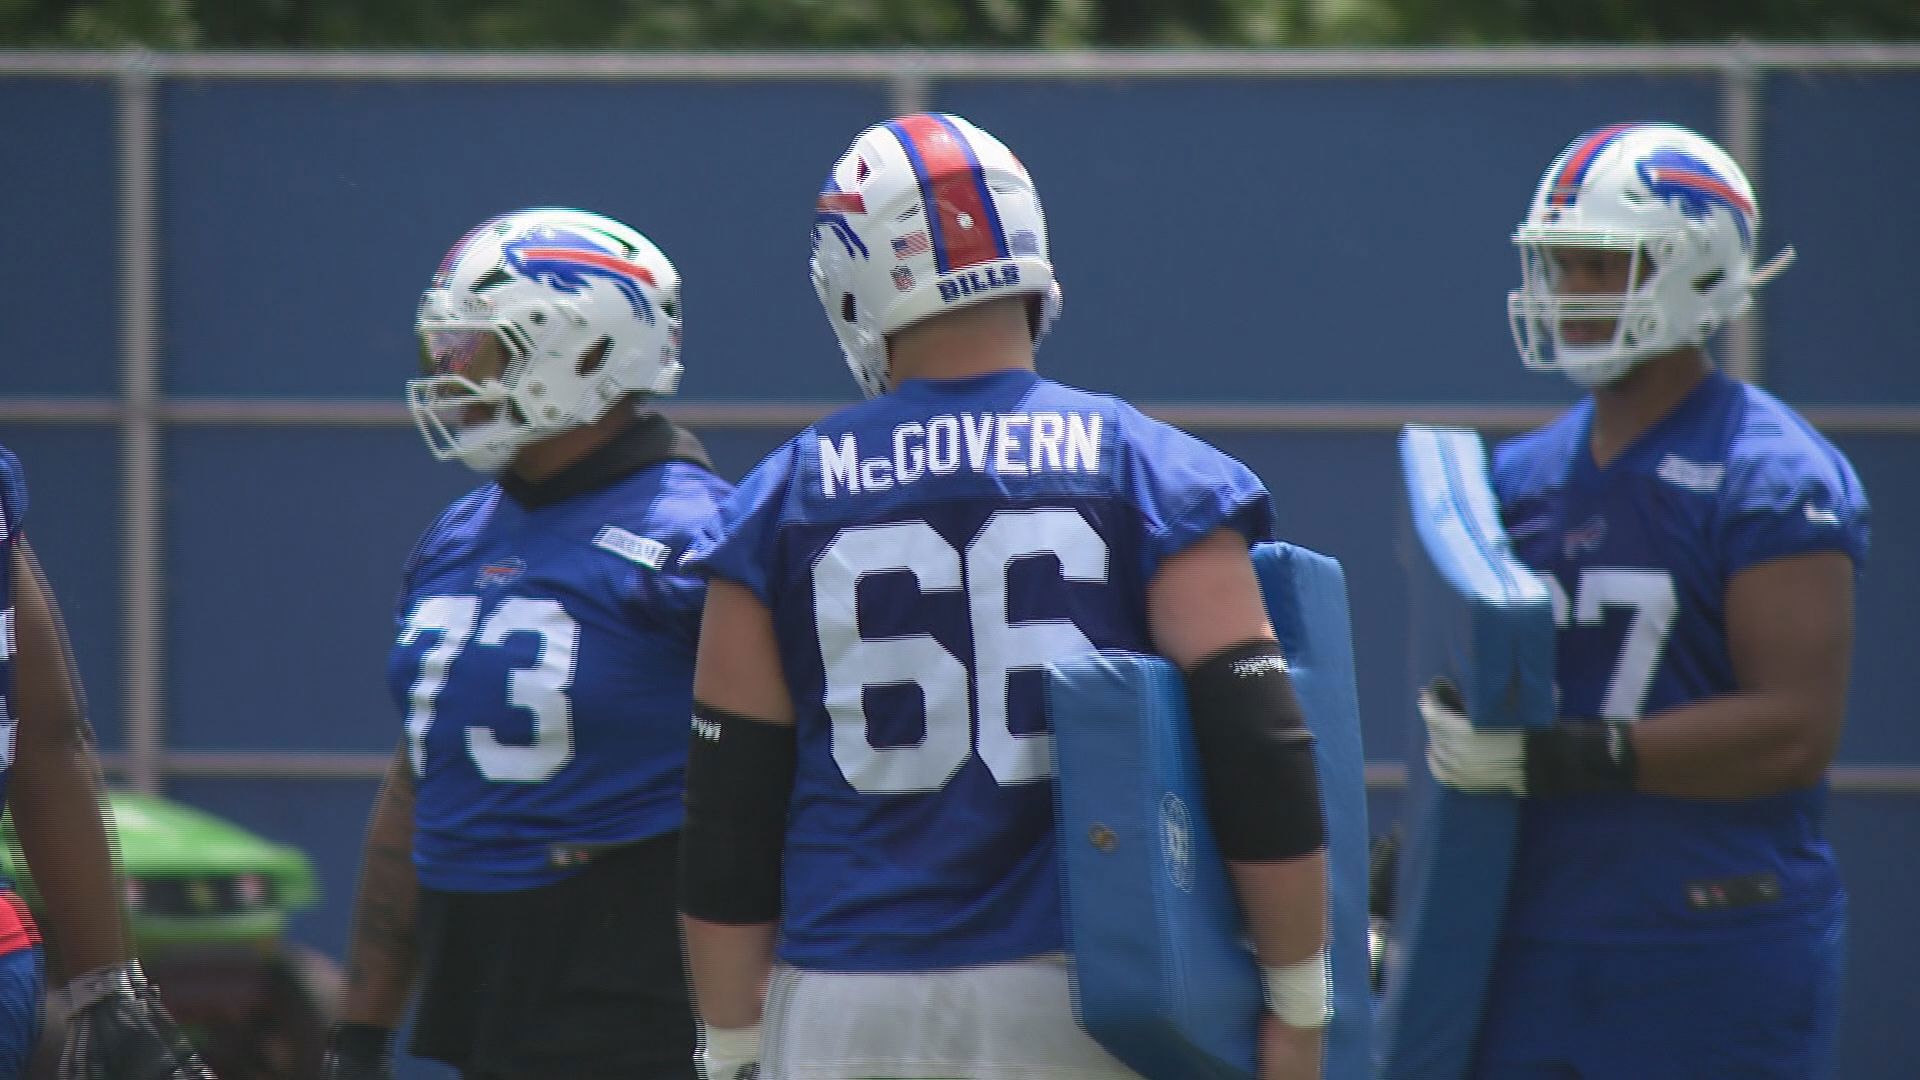 Connor McGovern is very happy to be going back to his roots this upcoming season as he makes the move on the offensive line from guard to center.